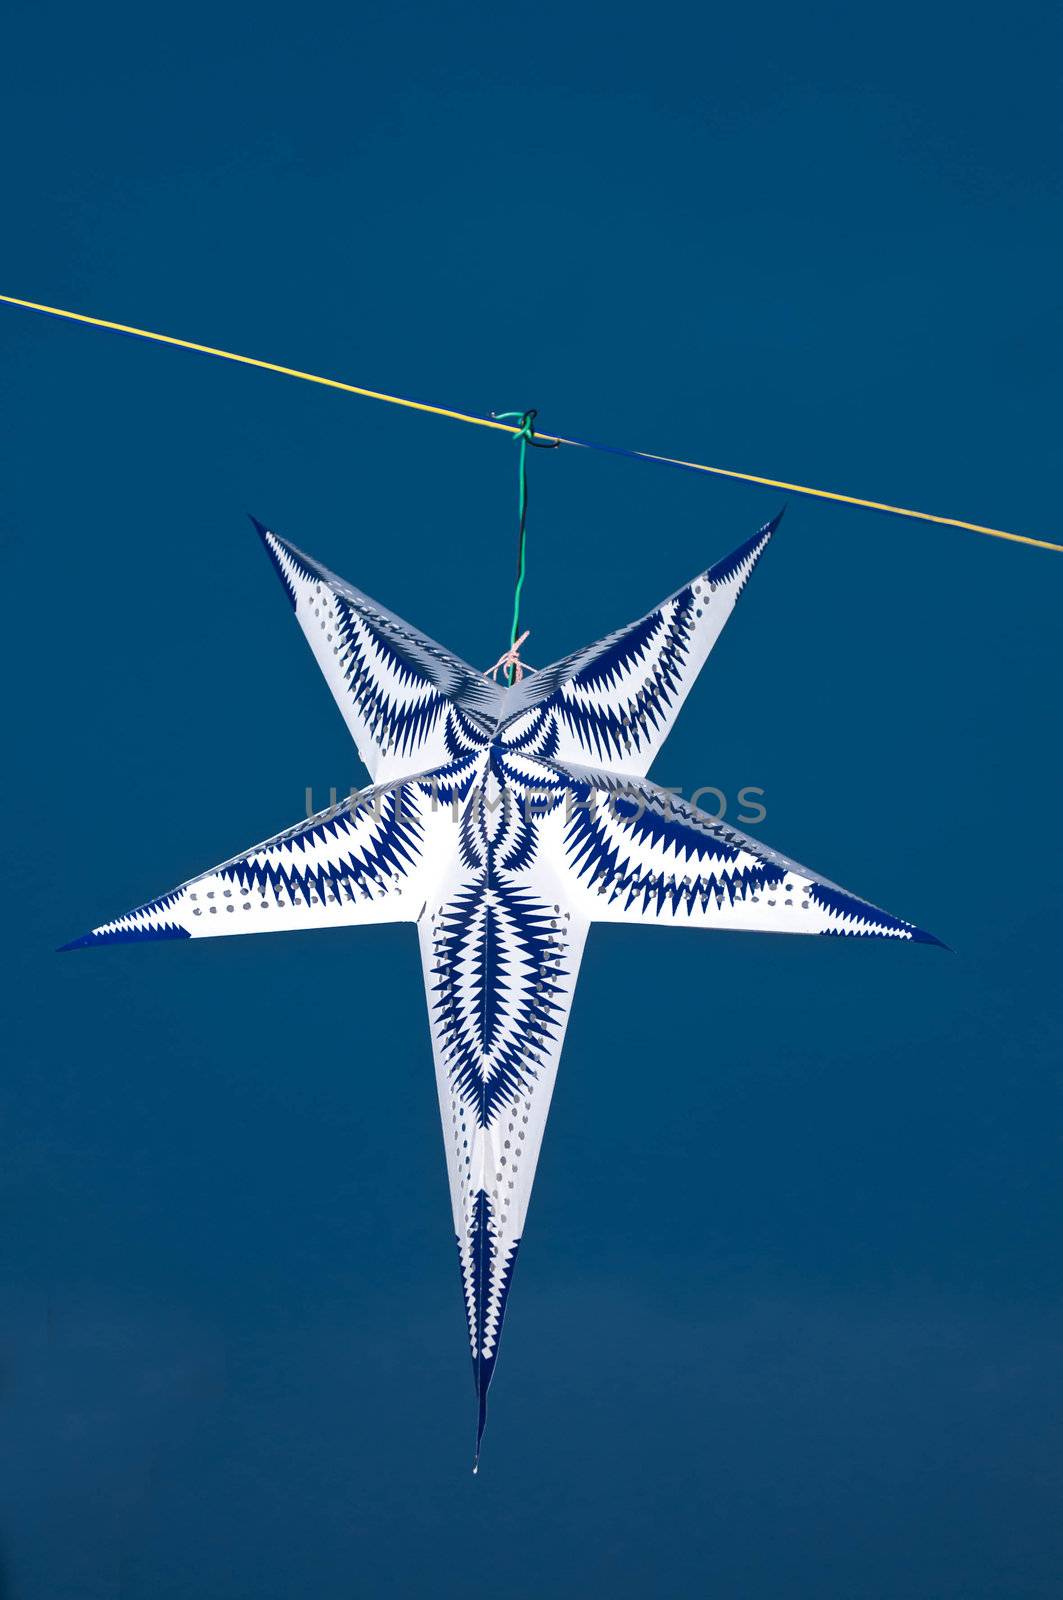 A star fully lit during the christmas season